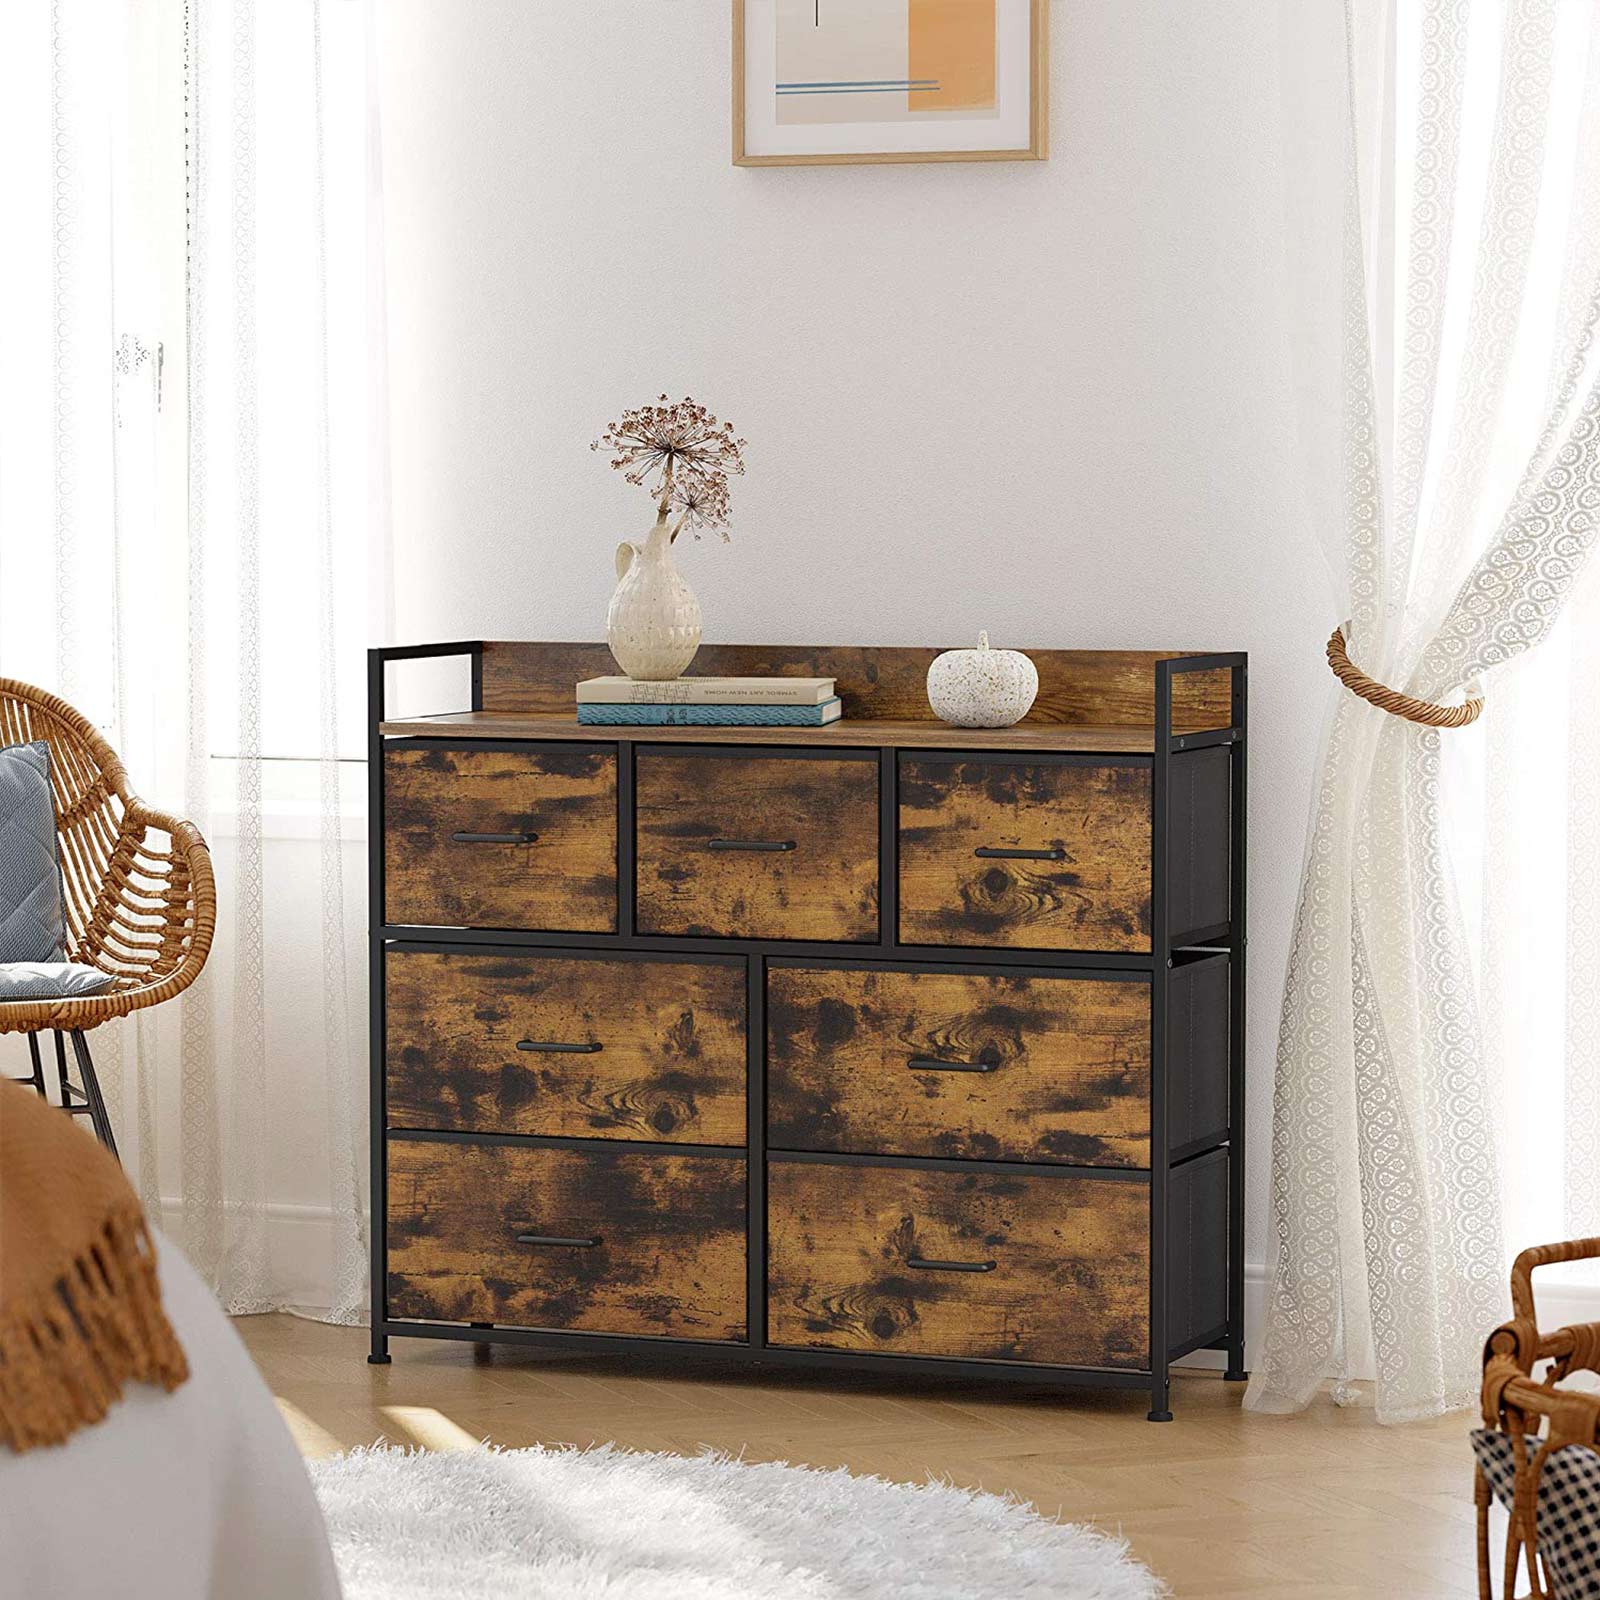 Fabric Chest of Drawers, Bedroom Storage Unit, Cabinet Dresser with 7 Drawers, with Metal Frame and Handles, SONGMICS, 3